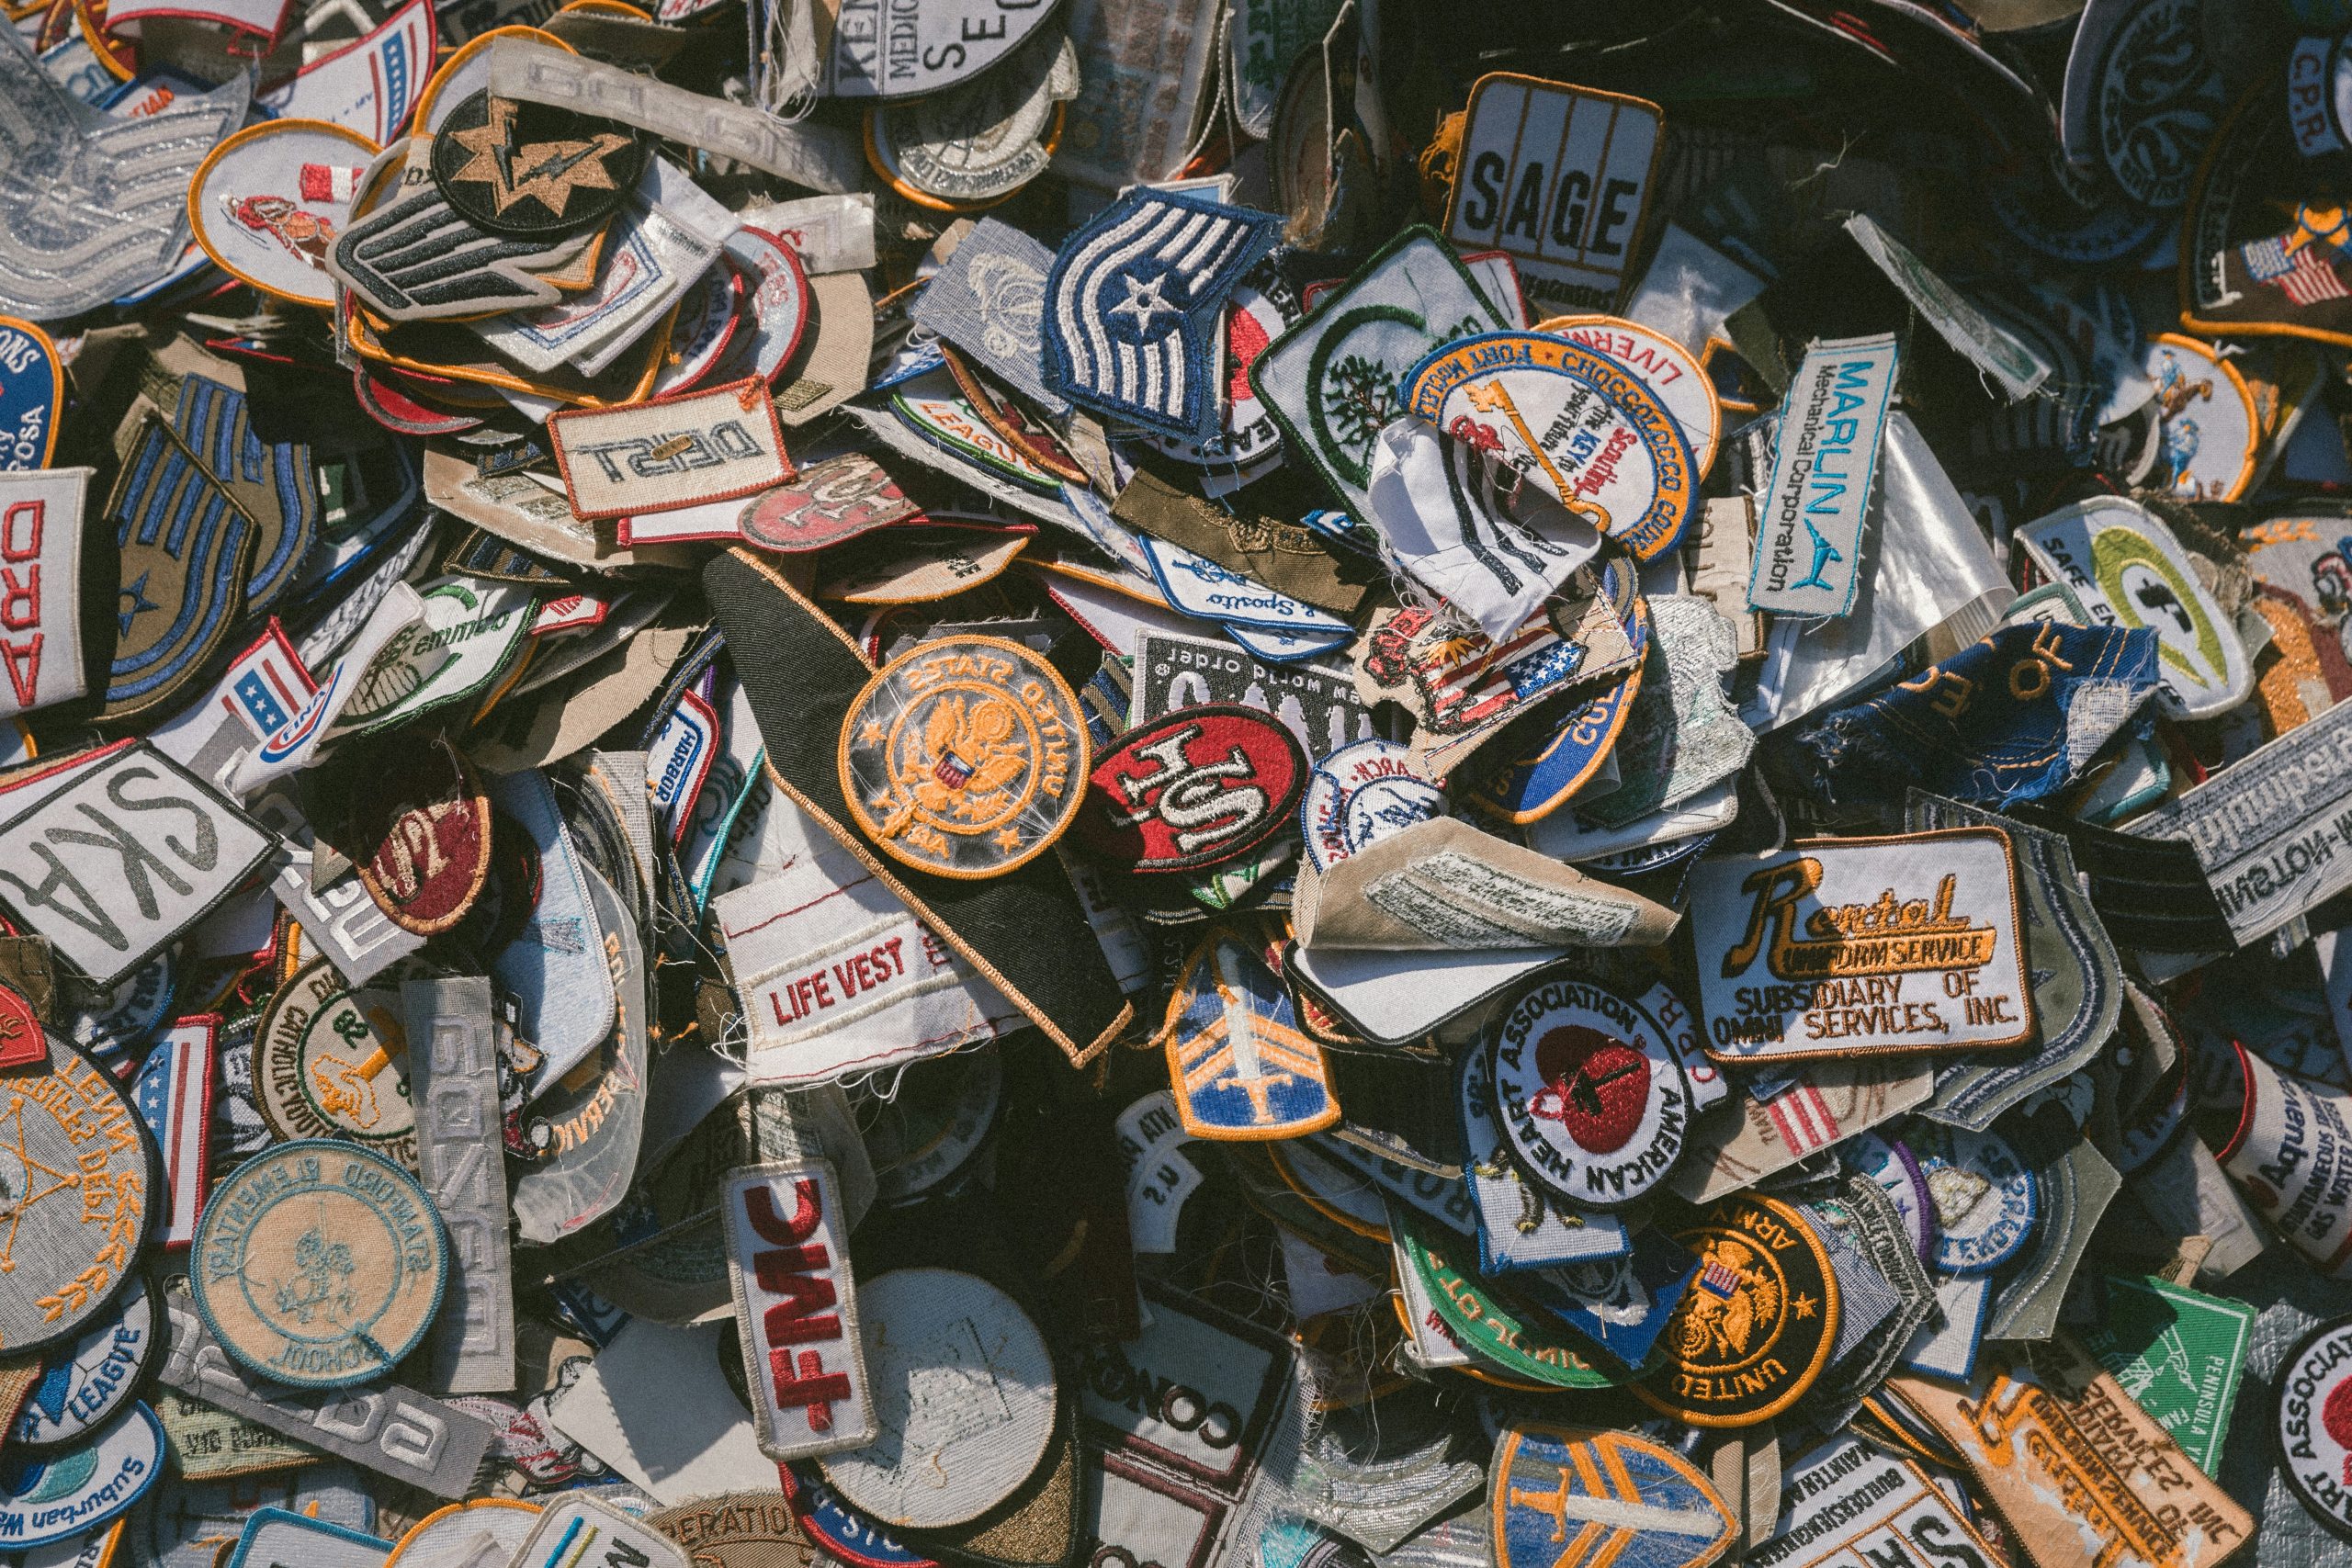 An awesome collection of patches